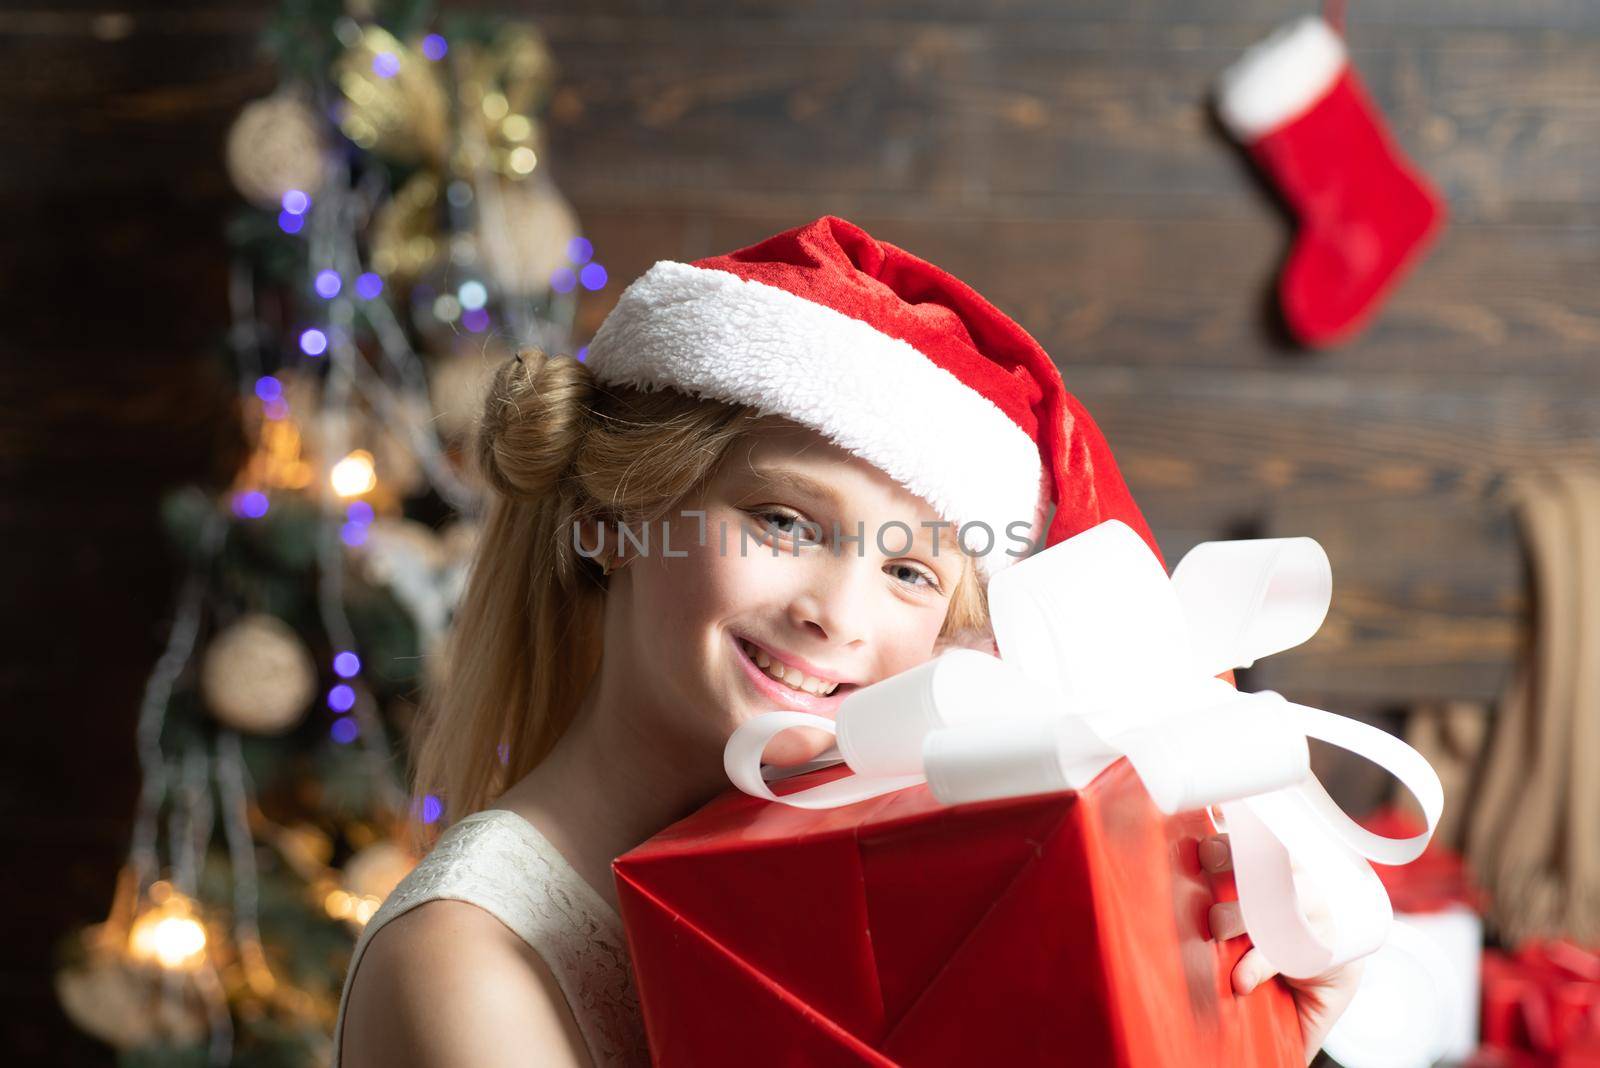 The morning before Xmas. Portrait kid with gift on wooden background. Cute little girl is decorating the Christmas tree indoors